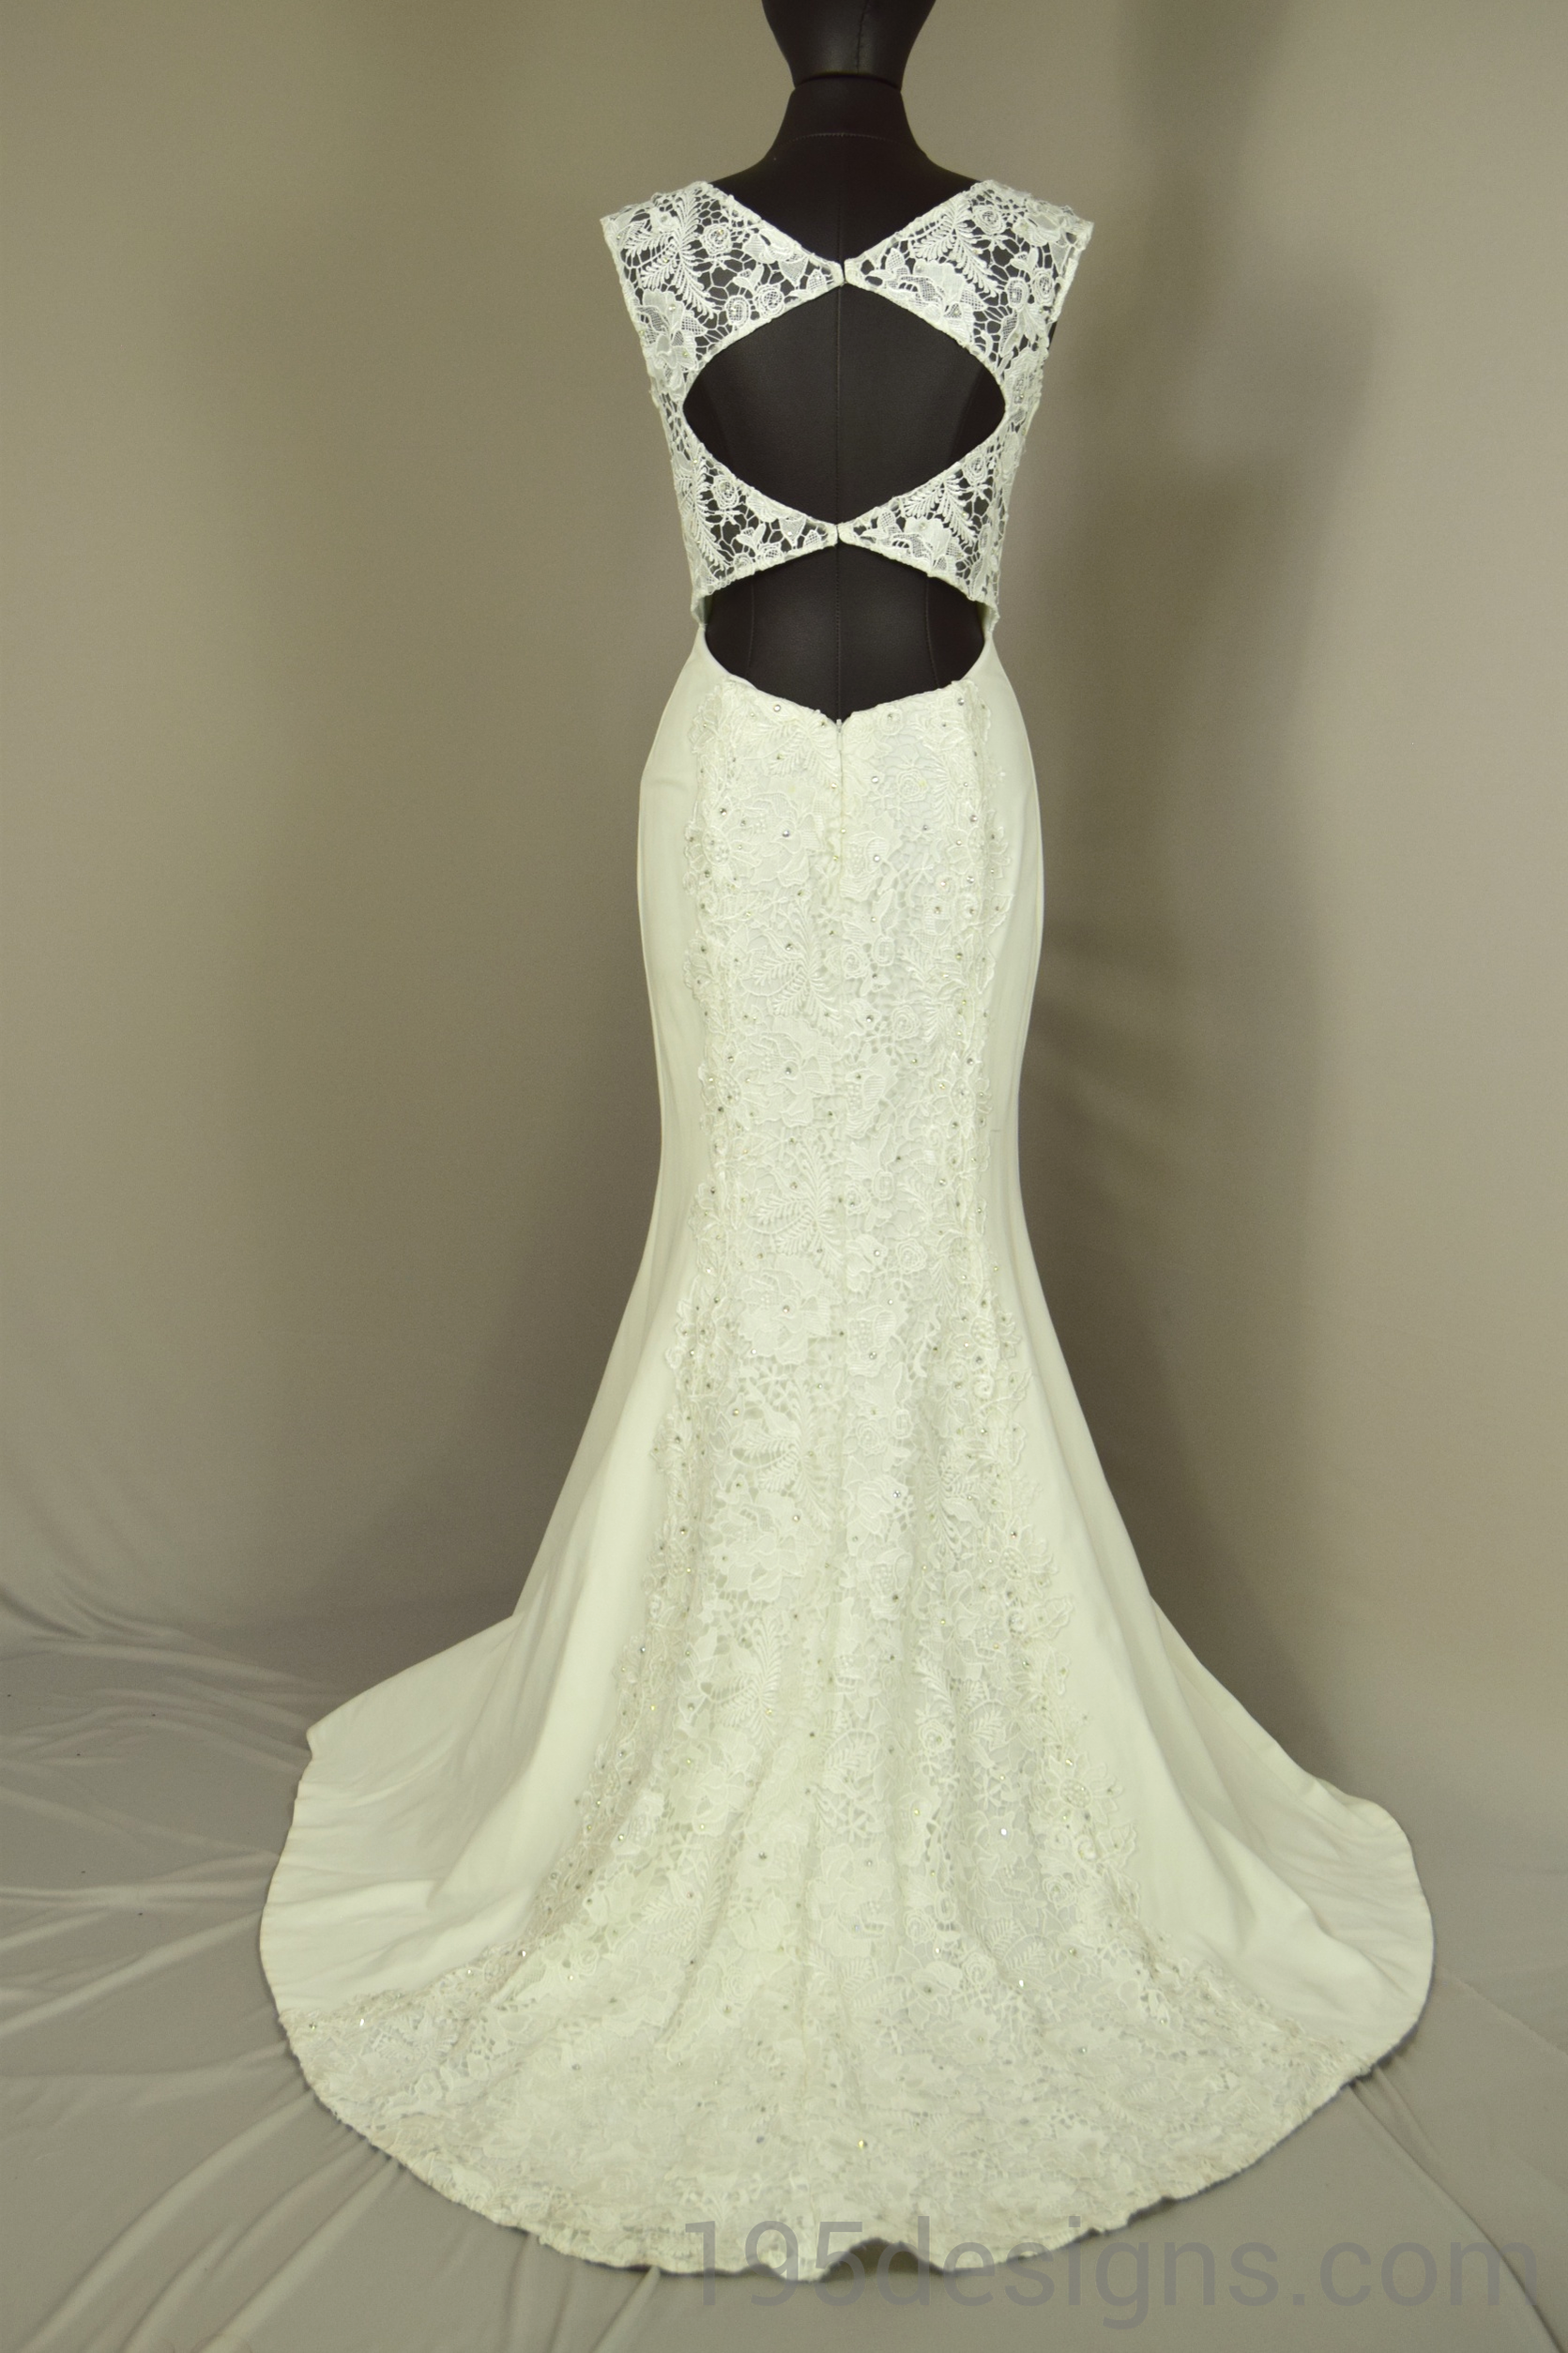 PANOPLY V-NECK LACE EVENING GOWN Wedding Dress